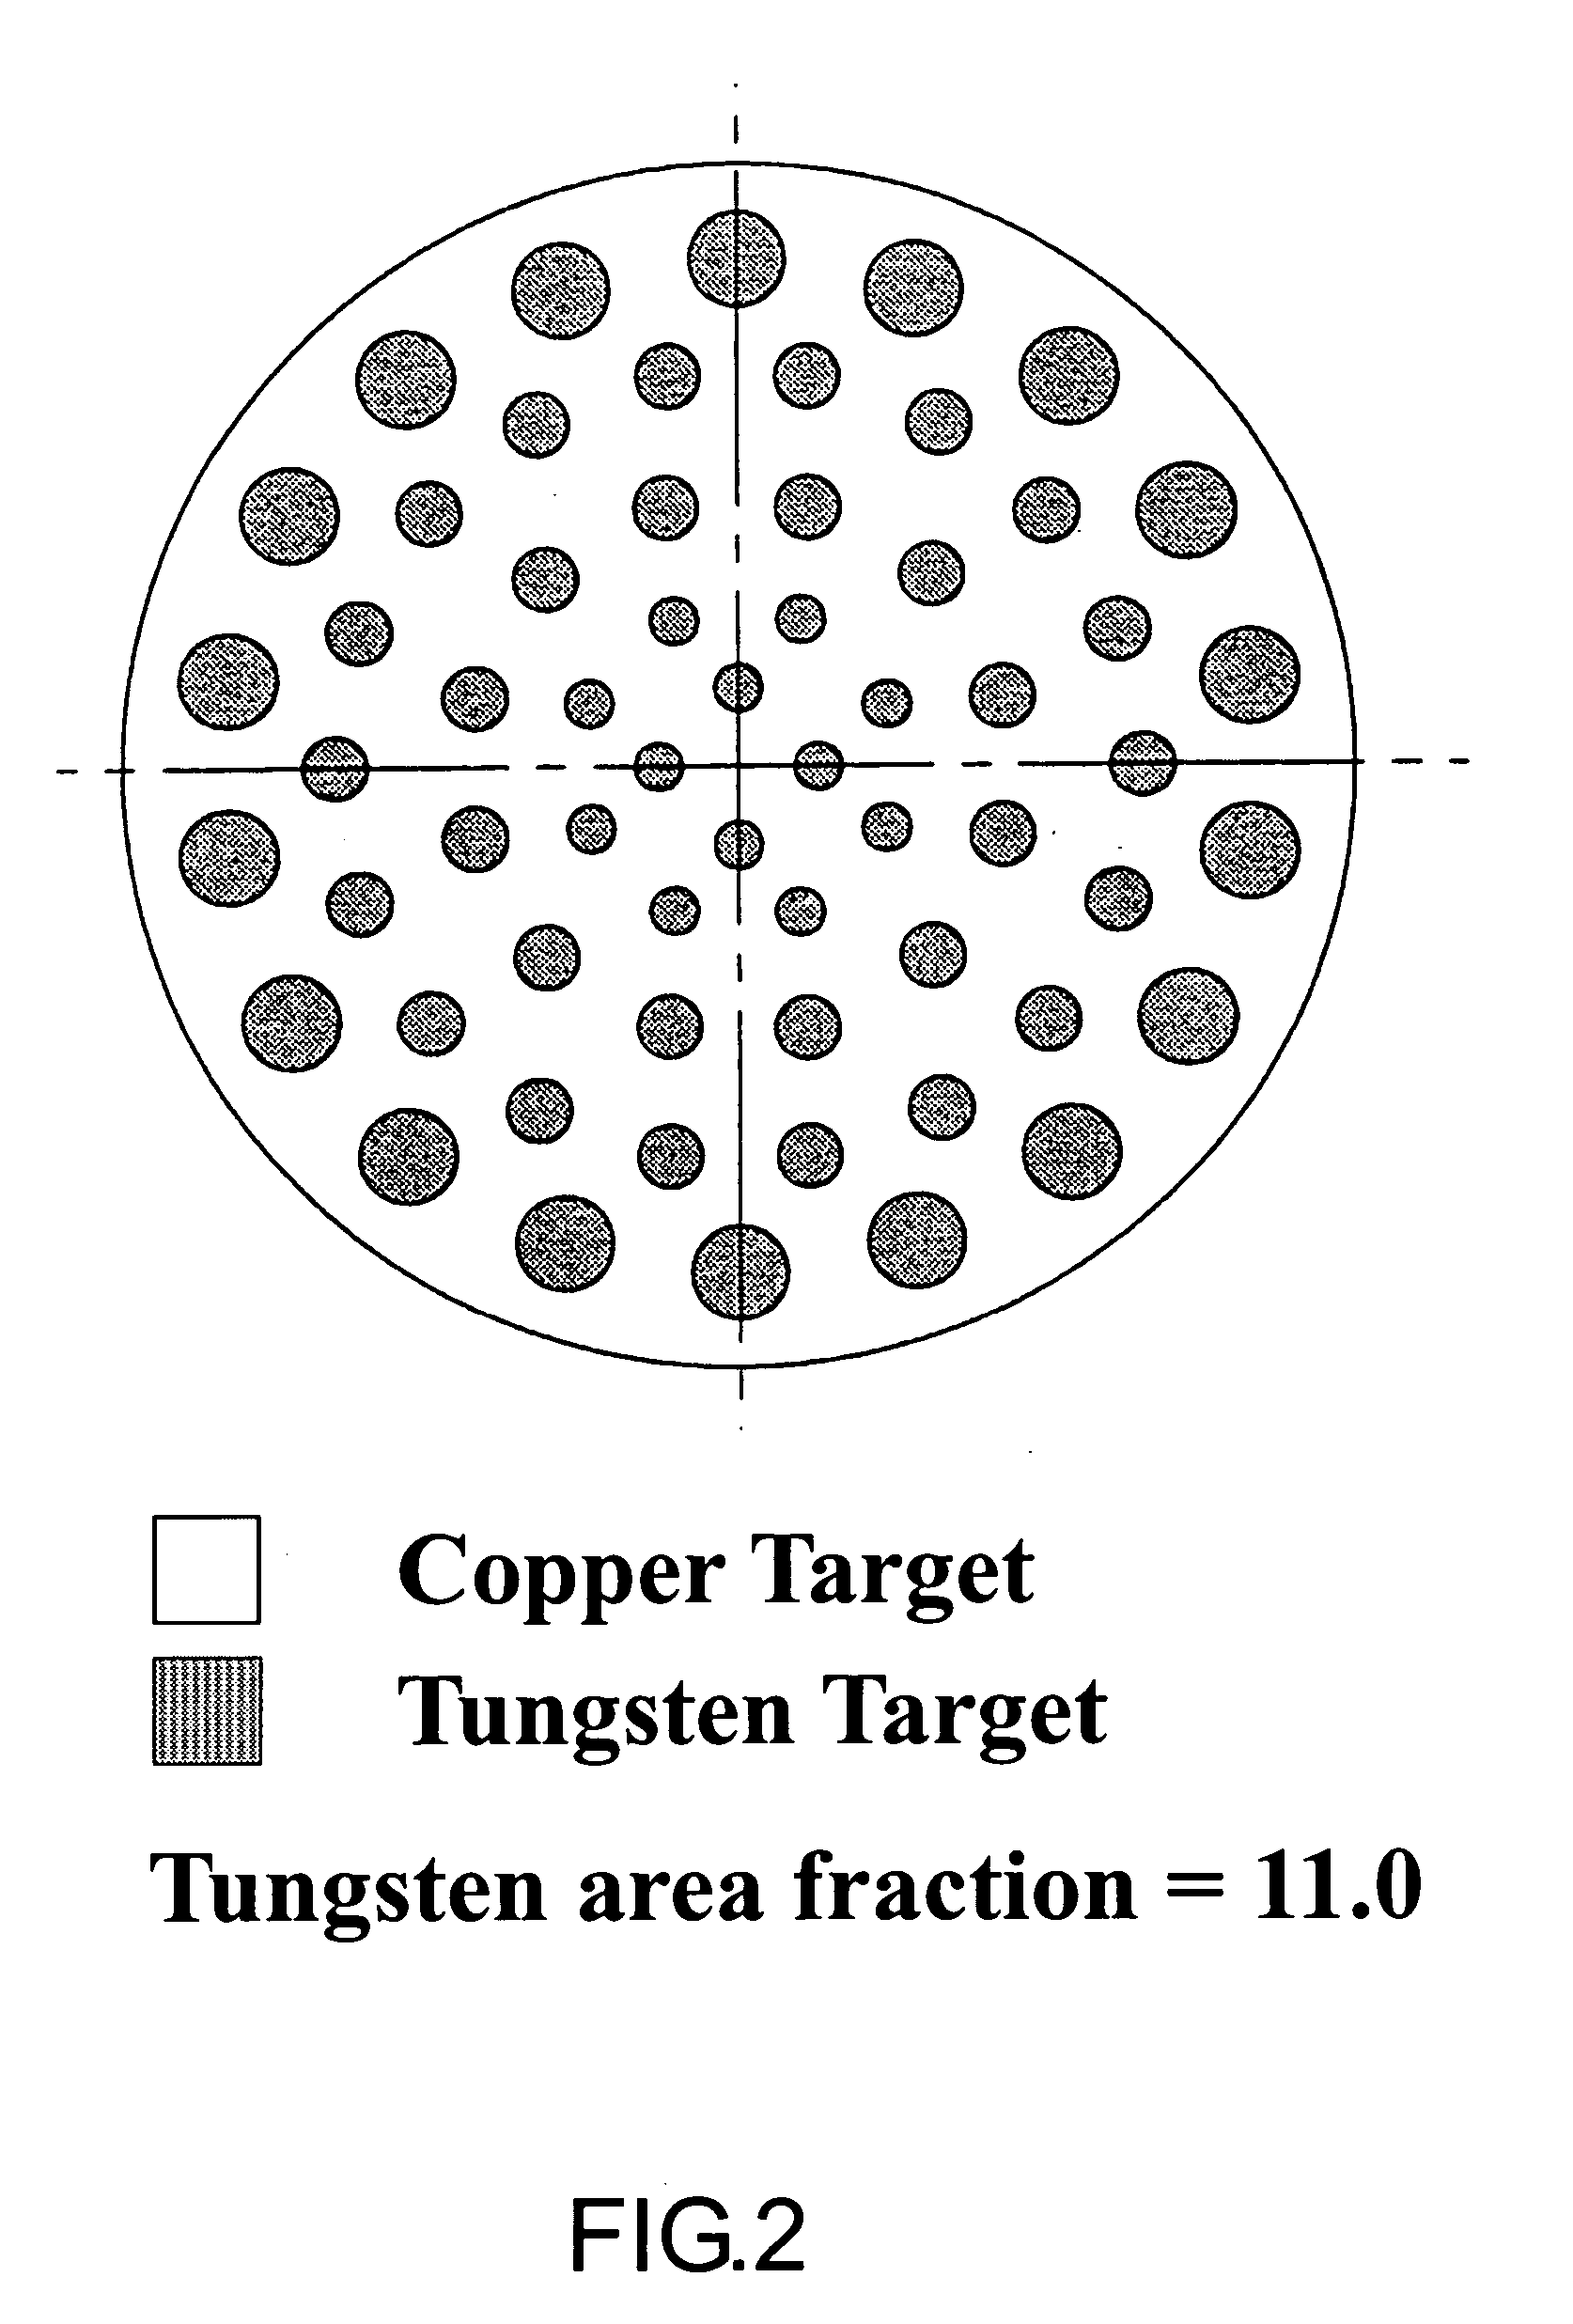 Copper film containing tungsten nitride for improving thermal stability, electrical conductivity and electric leakage properties and a manufacturing method for the copper film